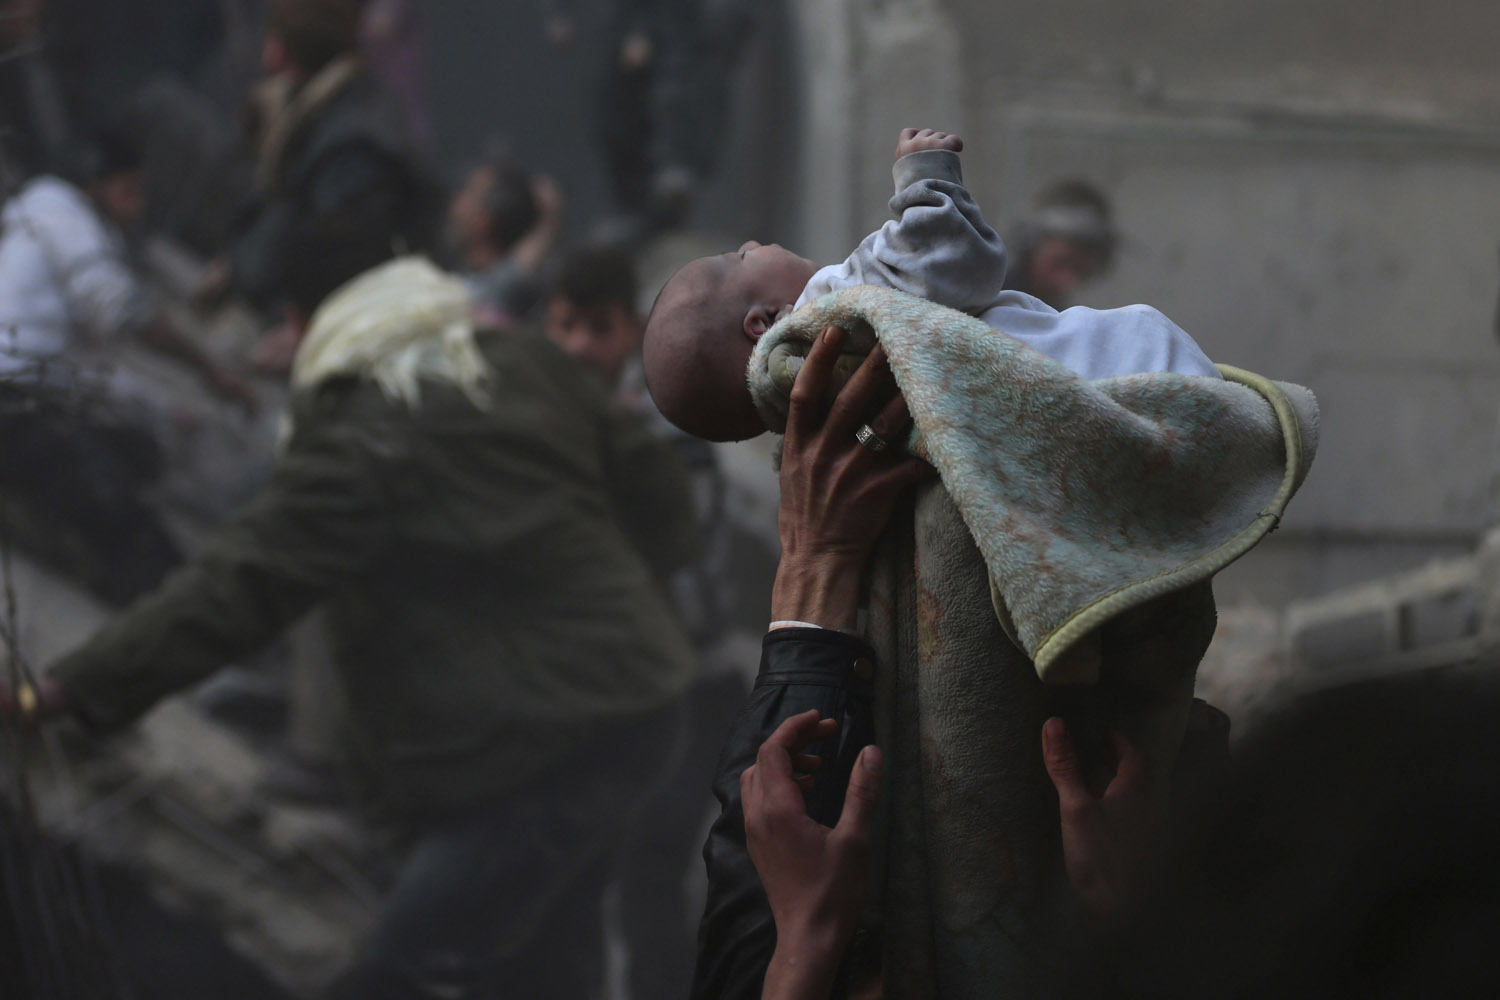 Men hold up a baby saved from under rubble, who survived an airstrike in the Duma neighbourhood of Damascus